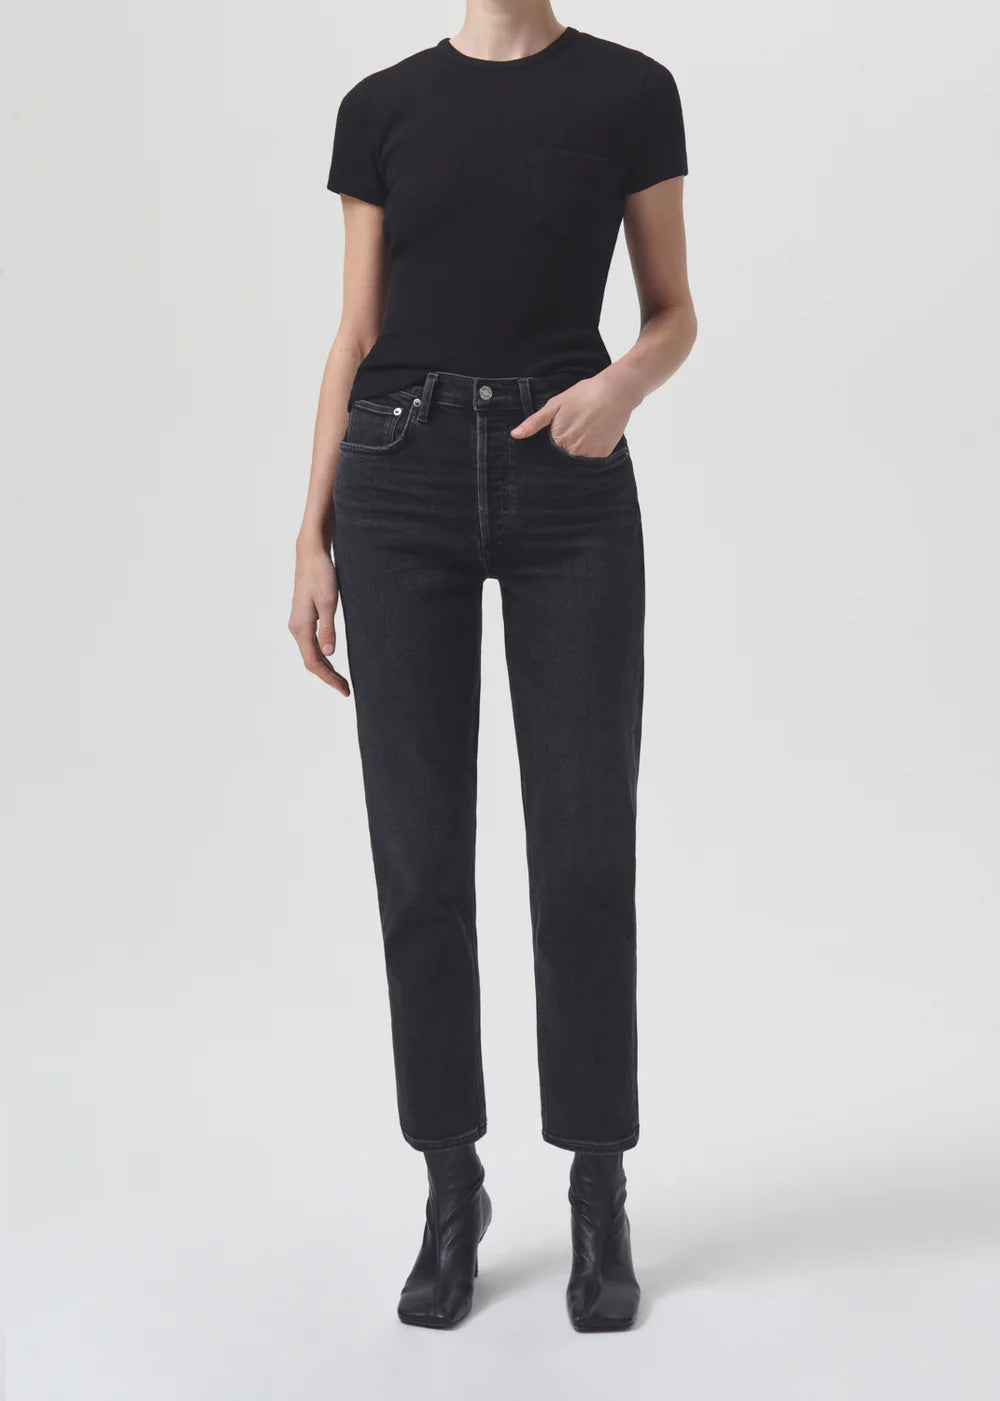 A woman wearing high-rise black jeans and a slim straight leg black t-shirt, the Riley Straight Crop - Panoramic by AGOLDE.